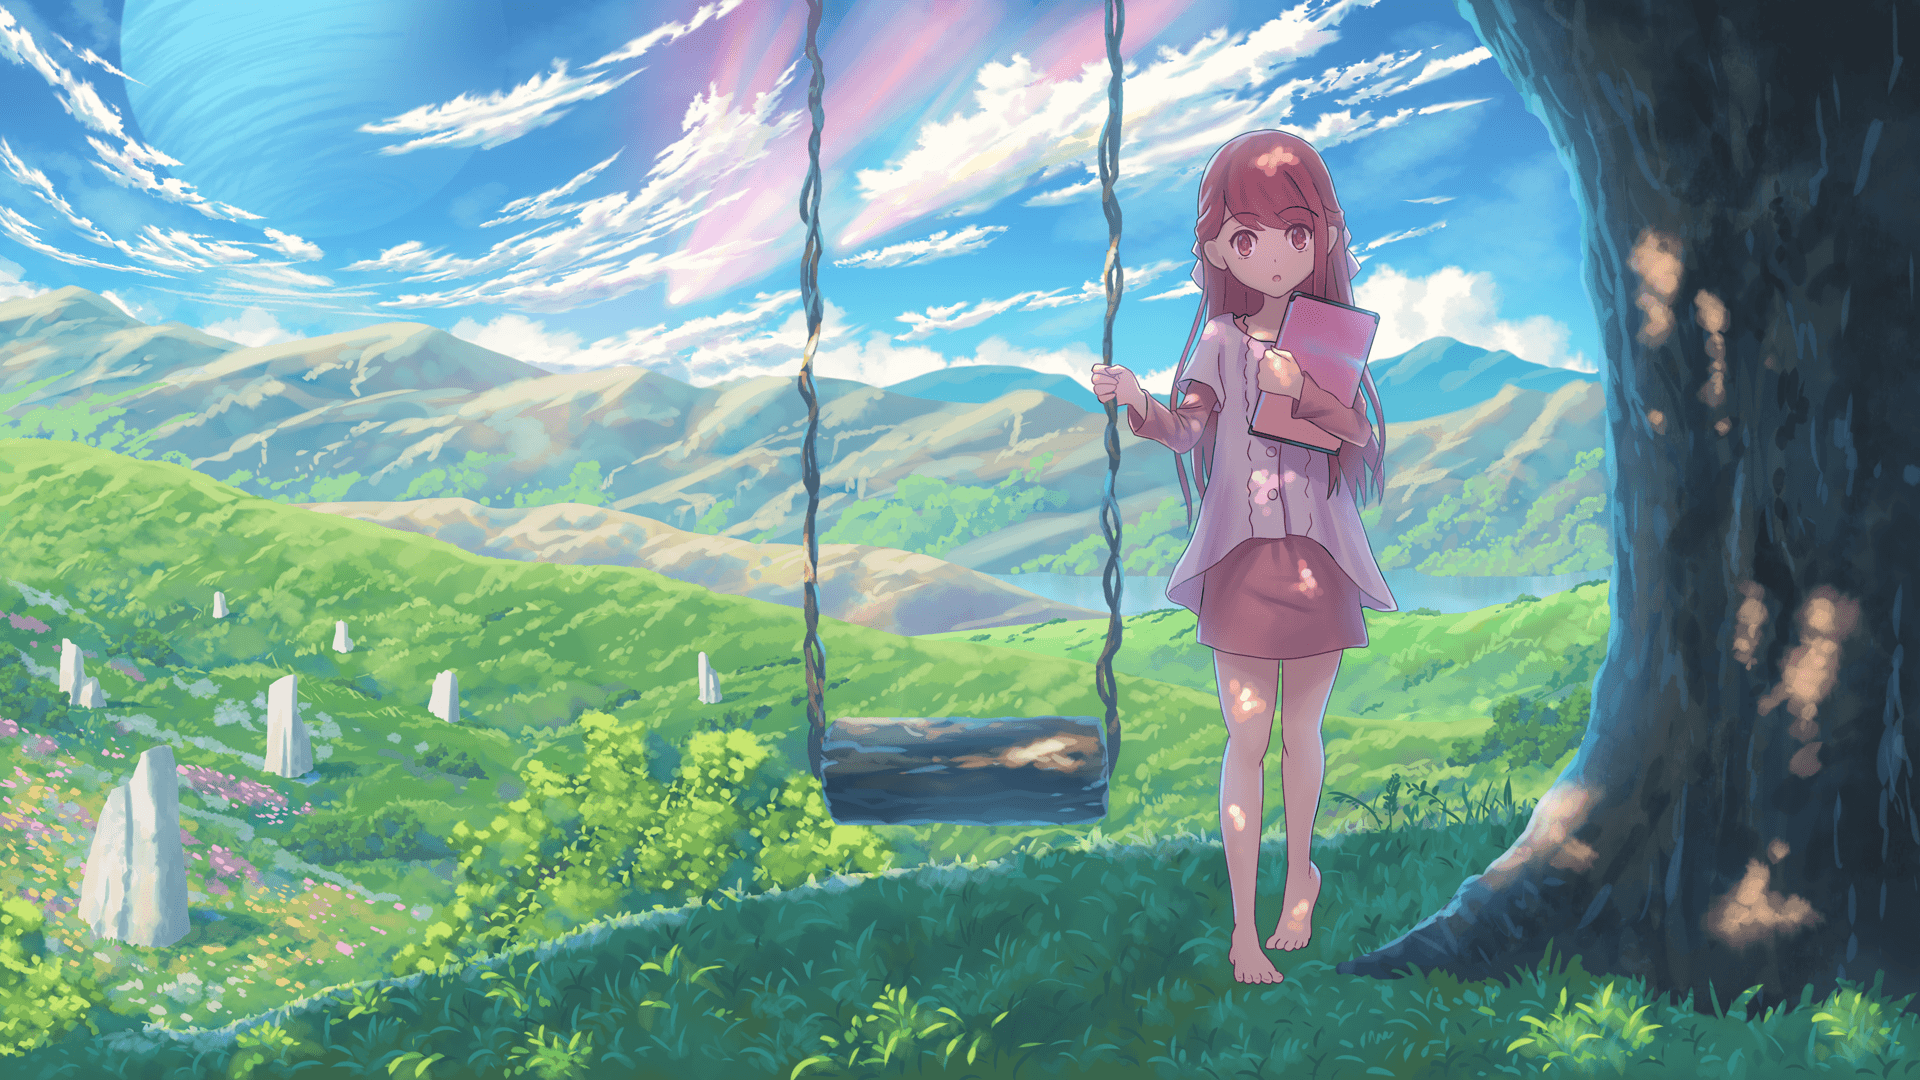 Shelter Rin Swing Landscape Grass Tree Scenic Sky Clouds